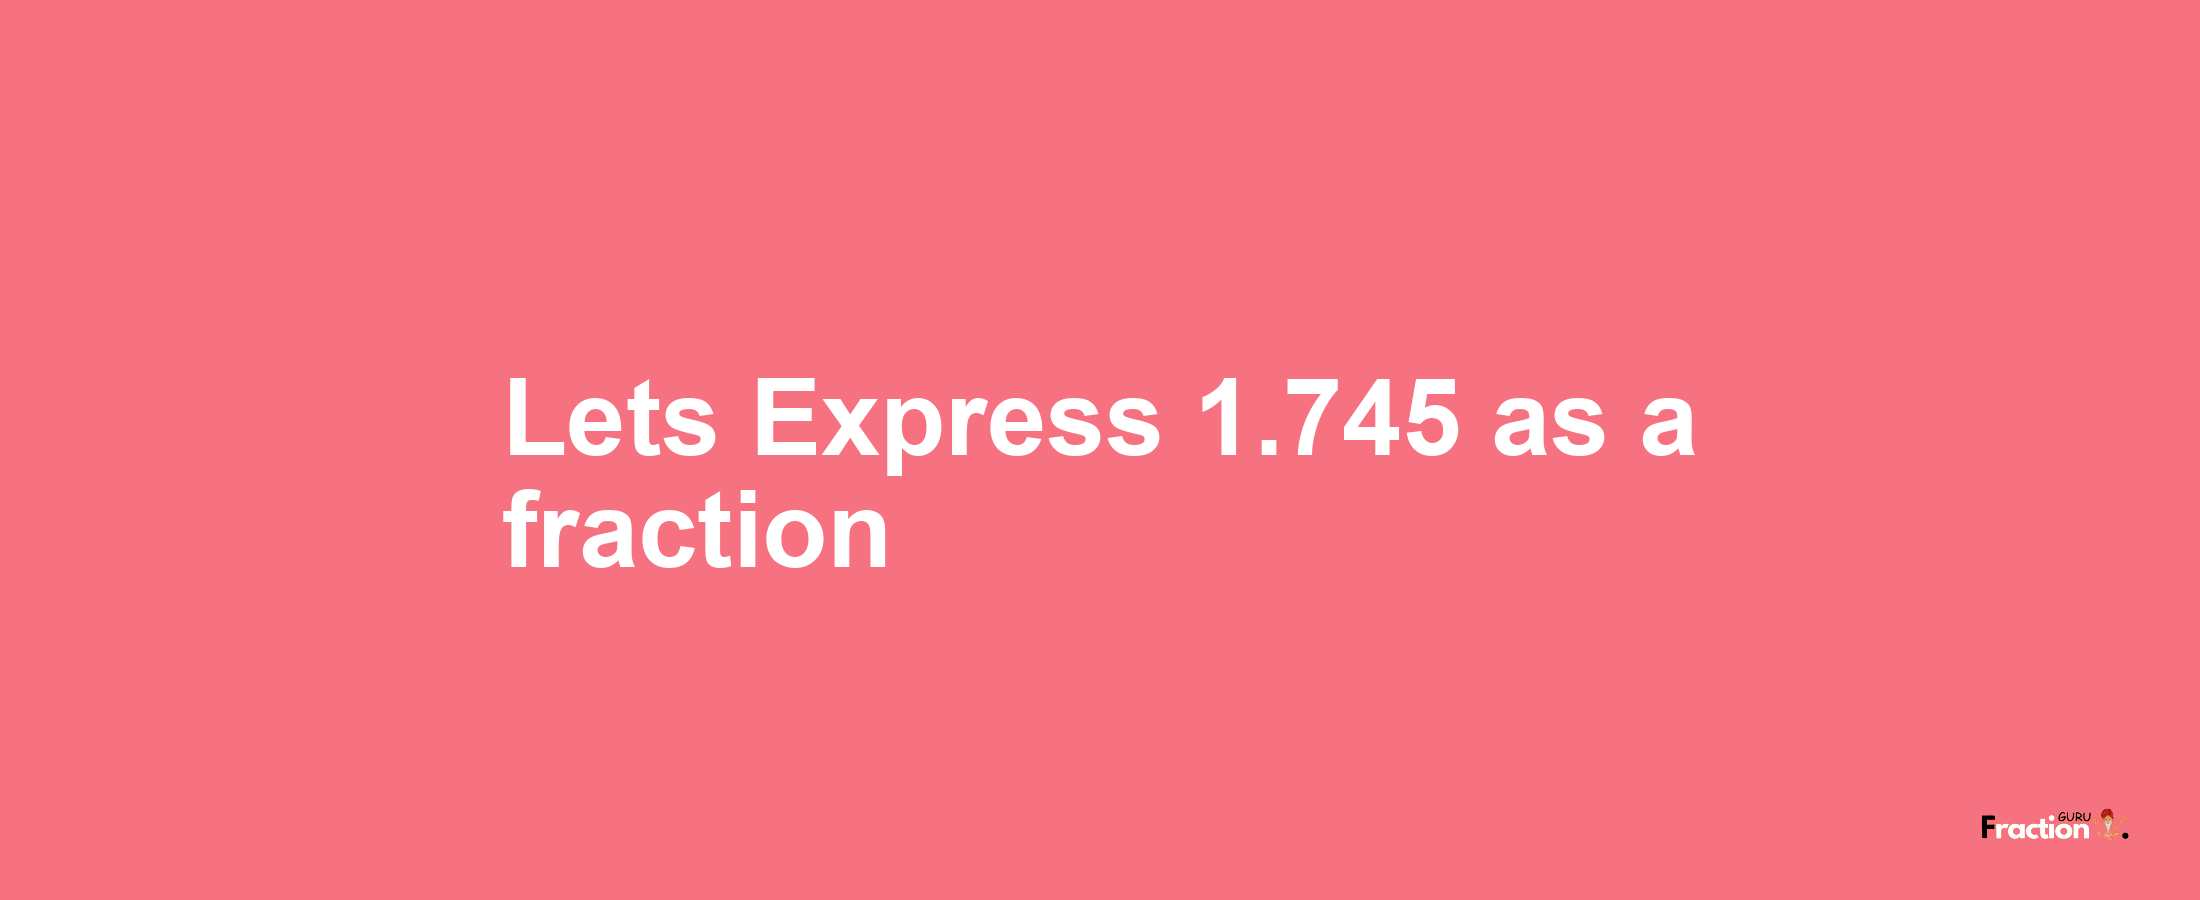 Lets Express 1.745 as afraction